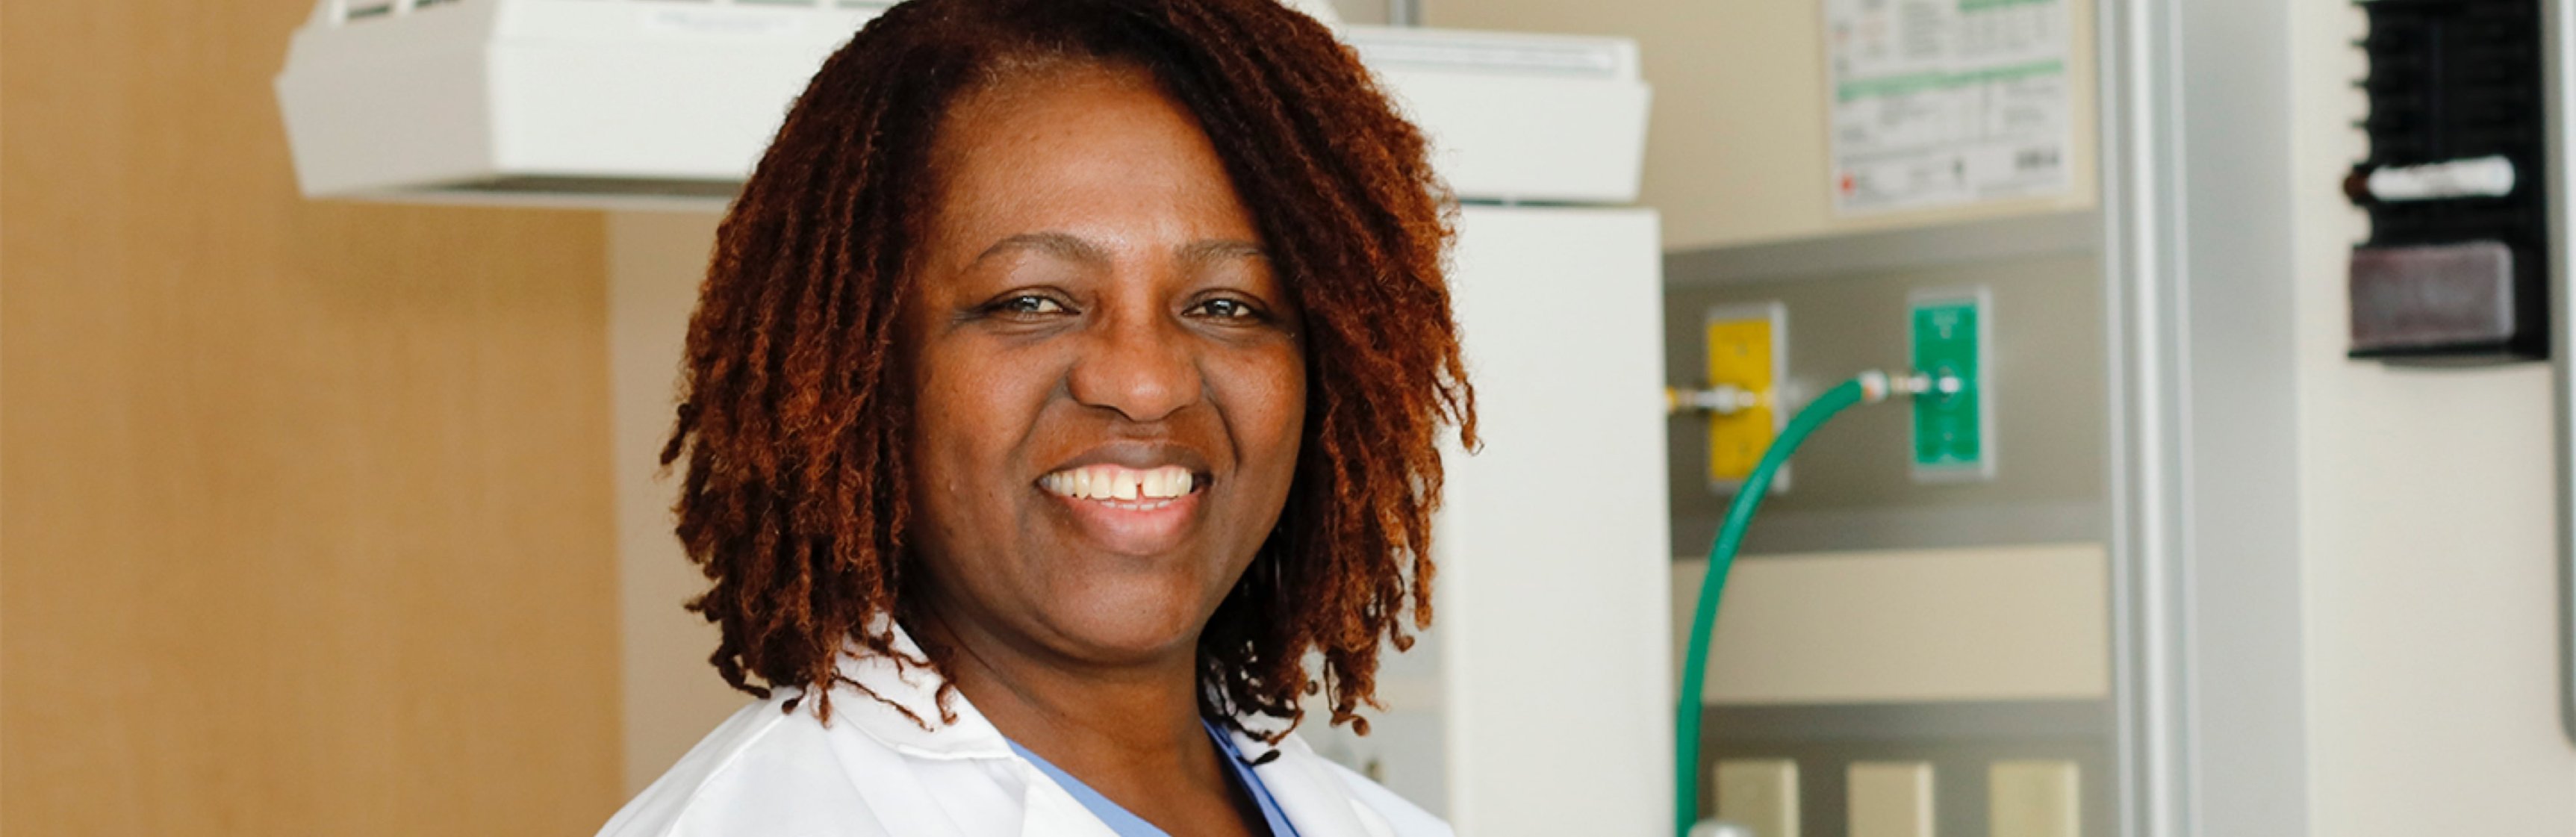 Registered nurse and midwife Angela Sojobi in the MLKCH maternity department